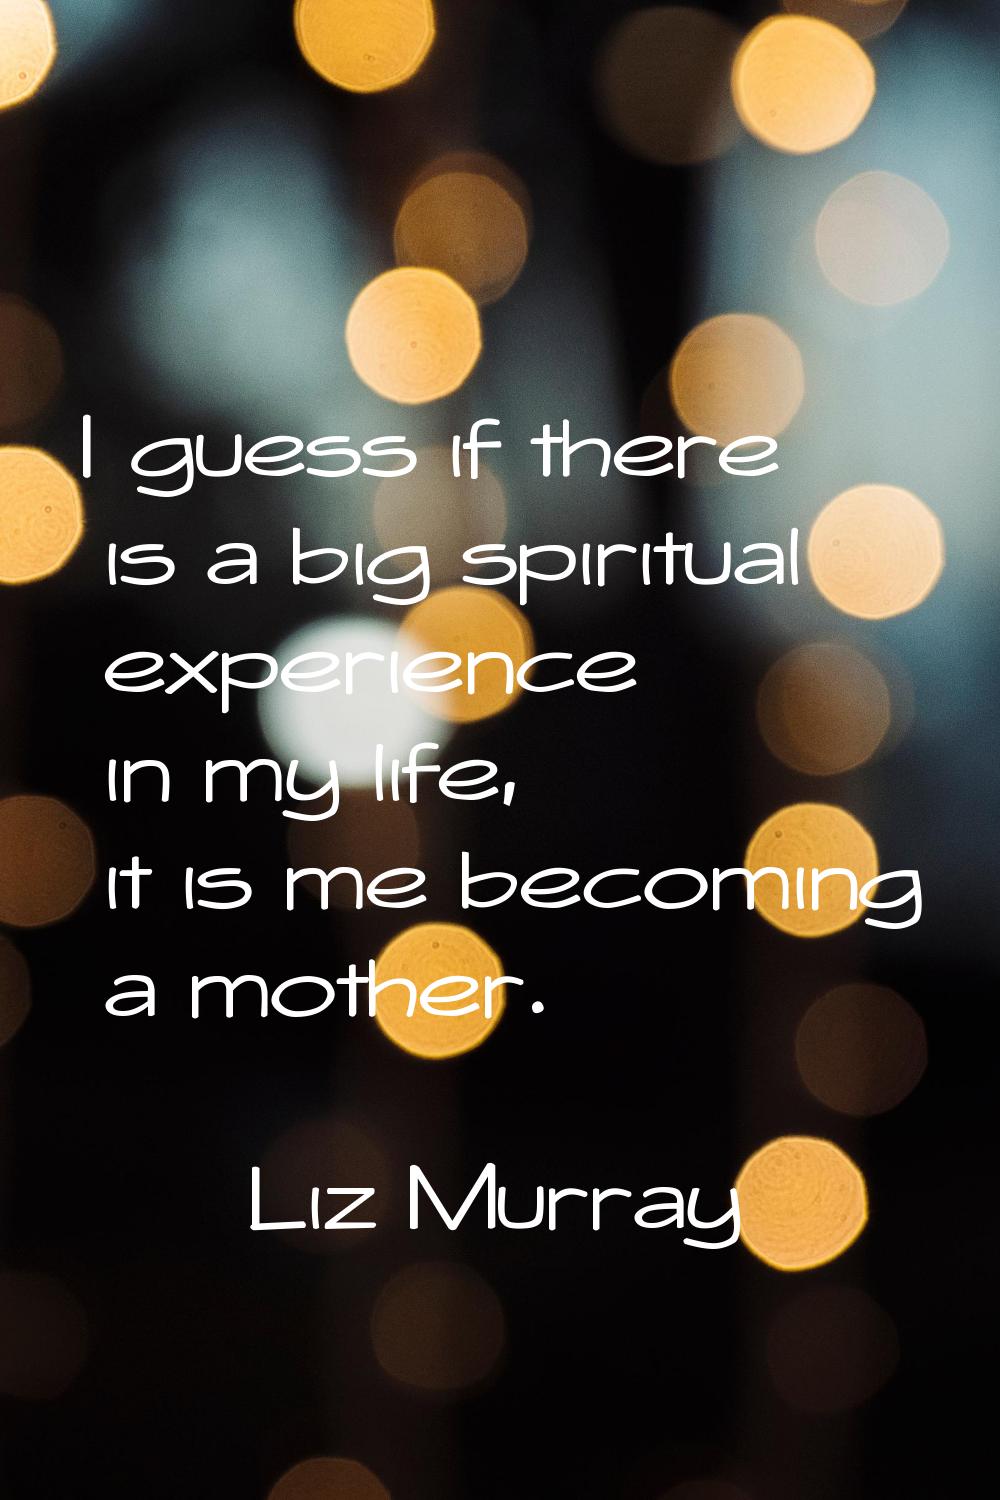 I guess if there is a big spiritual experience in my life, it is me becoming a mother.